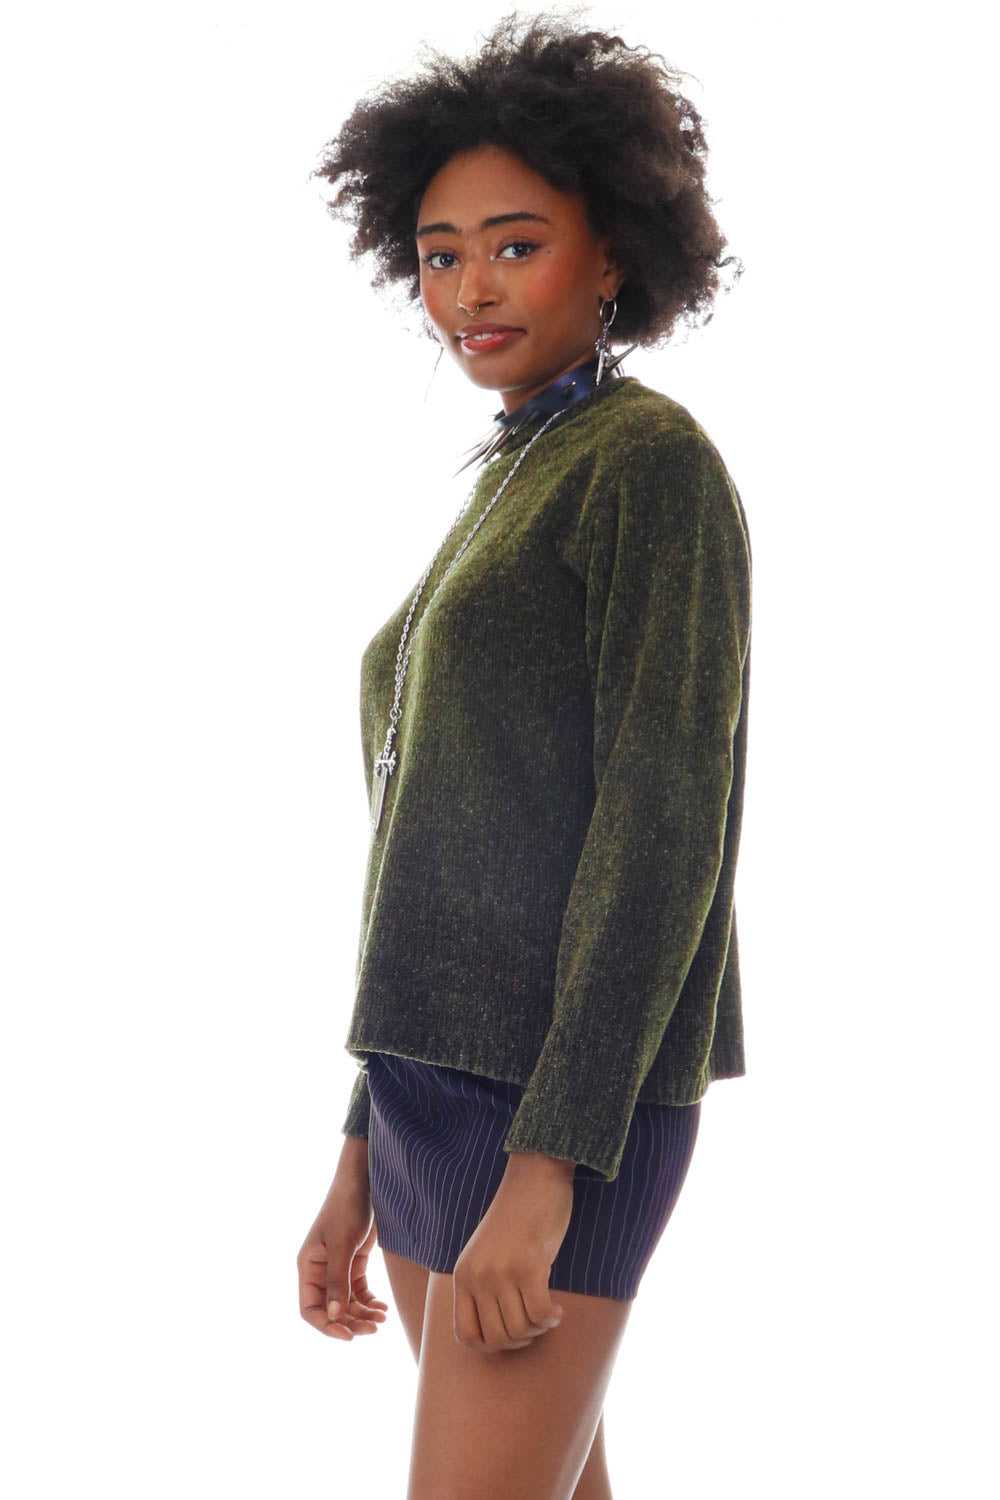 Vintage 90's Fuzzy Green Sweater - S/M - image 3